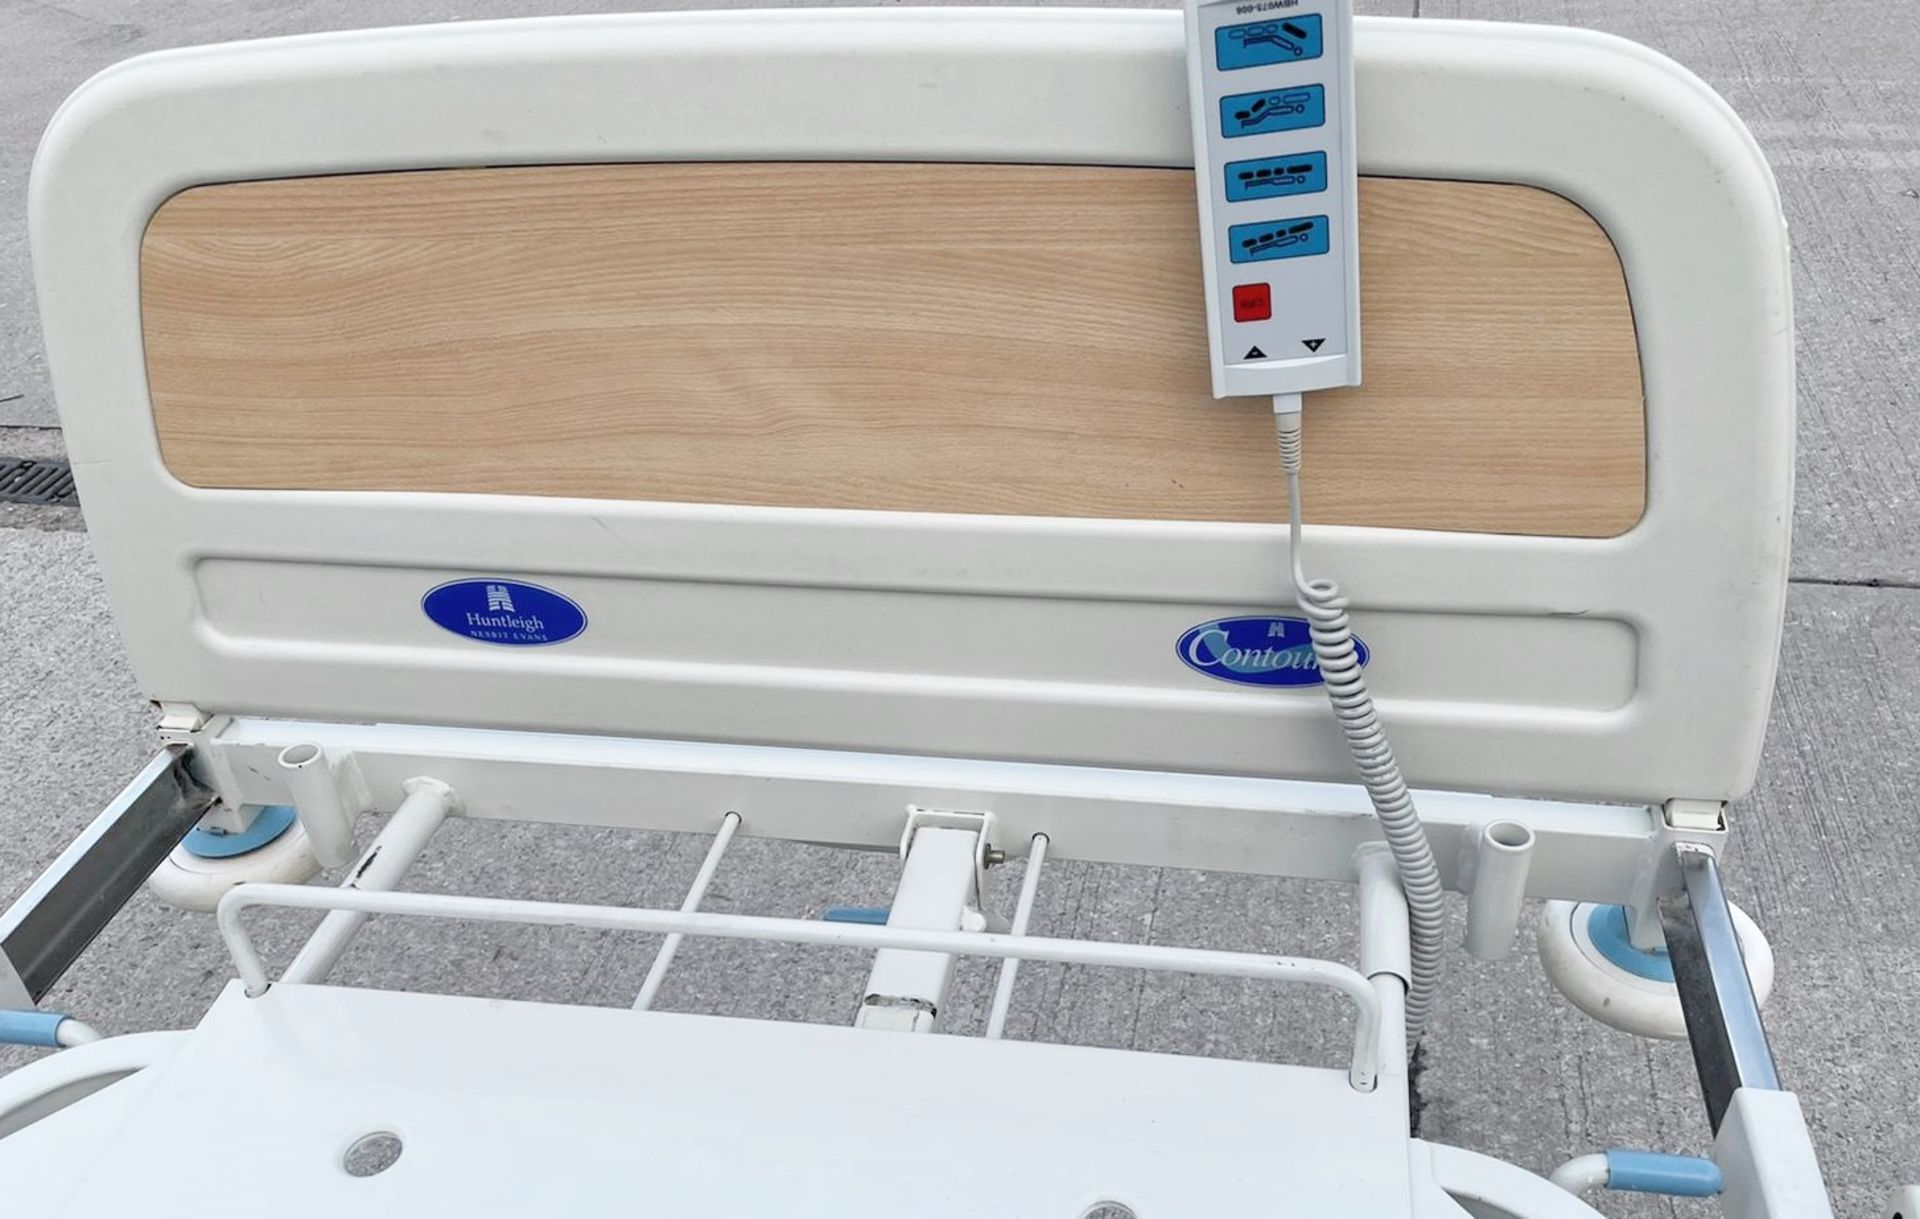 1 x Huntleigh CONTOURA Electric Hospital Bed - Features Rise/Fall 3-Way Profiling, Side Rails, - Image 8 of 16